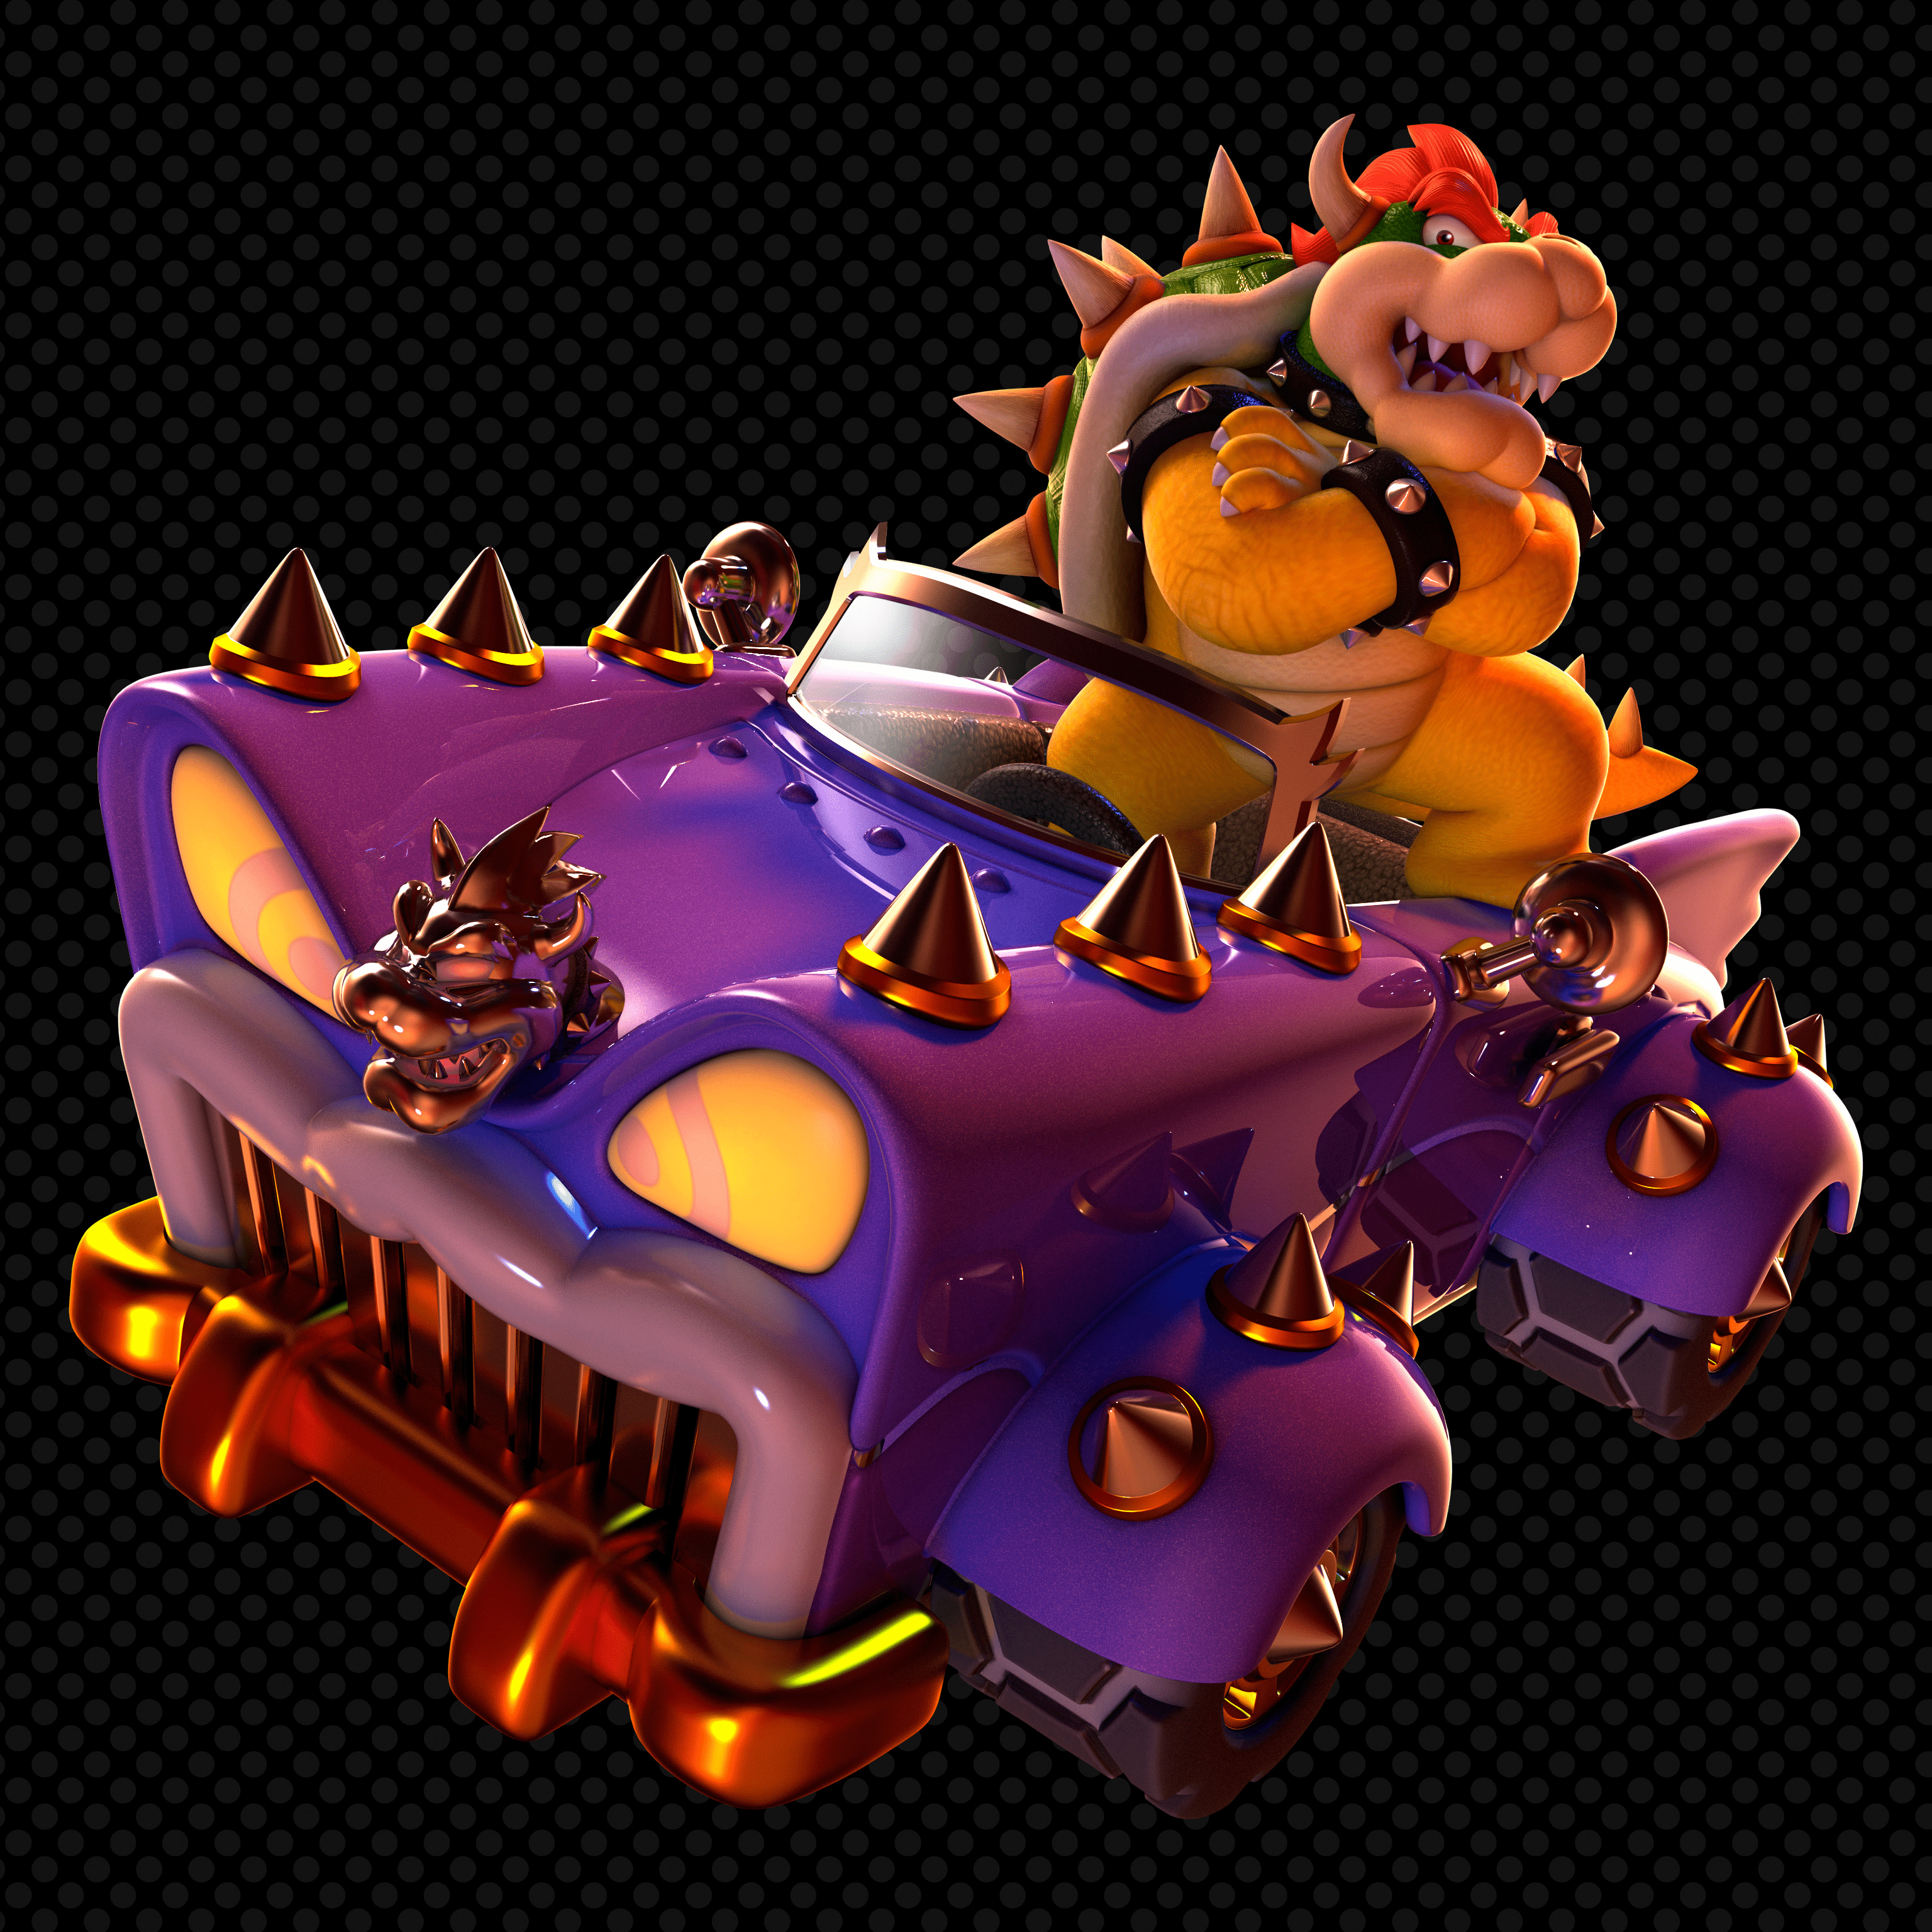 Free download Bowsers Car Wallpaper Super Mario 3D World by DryBowzillaJP on [3072x3072] for your Desktop, Mobile & Tablet. Explore Bowser Wallpaper. Bowser Jr Wallpaper, Mario vs Bowser Wallpaper